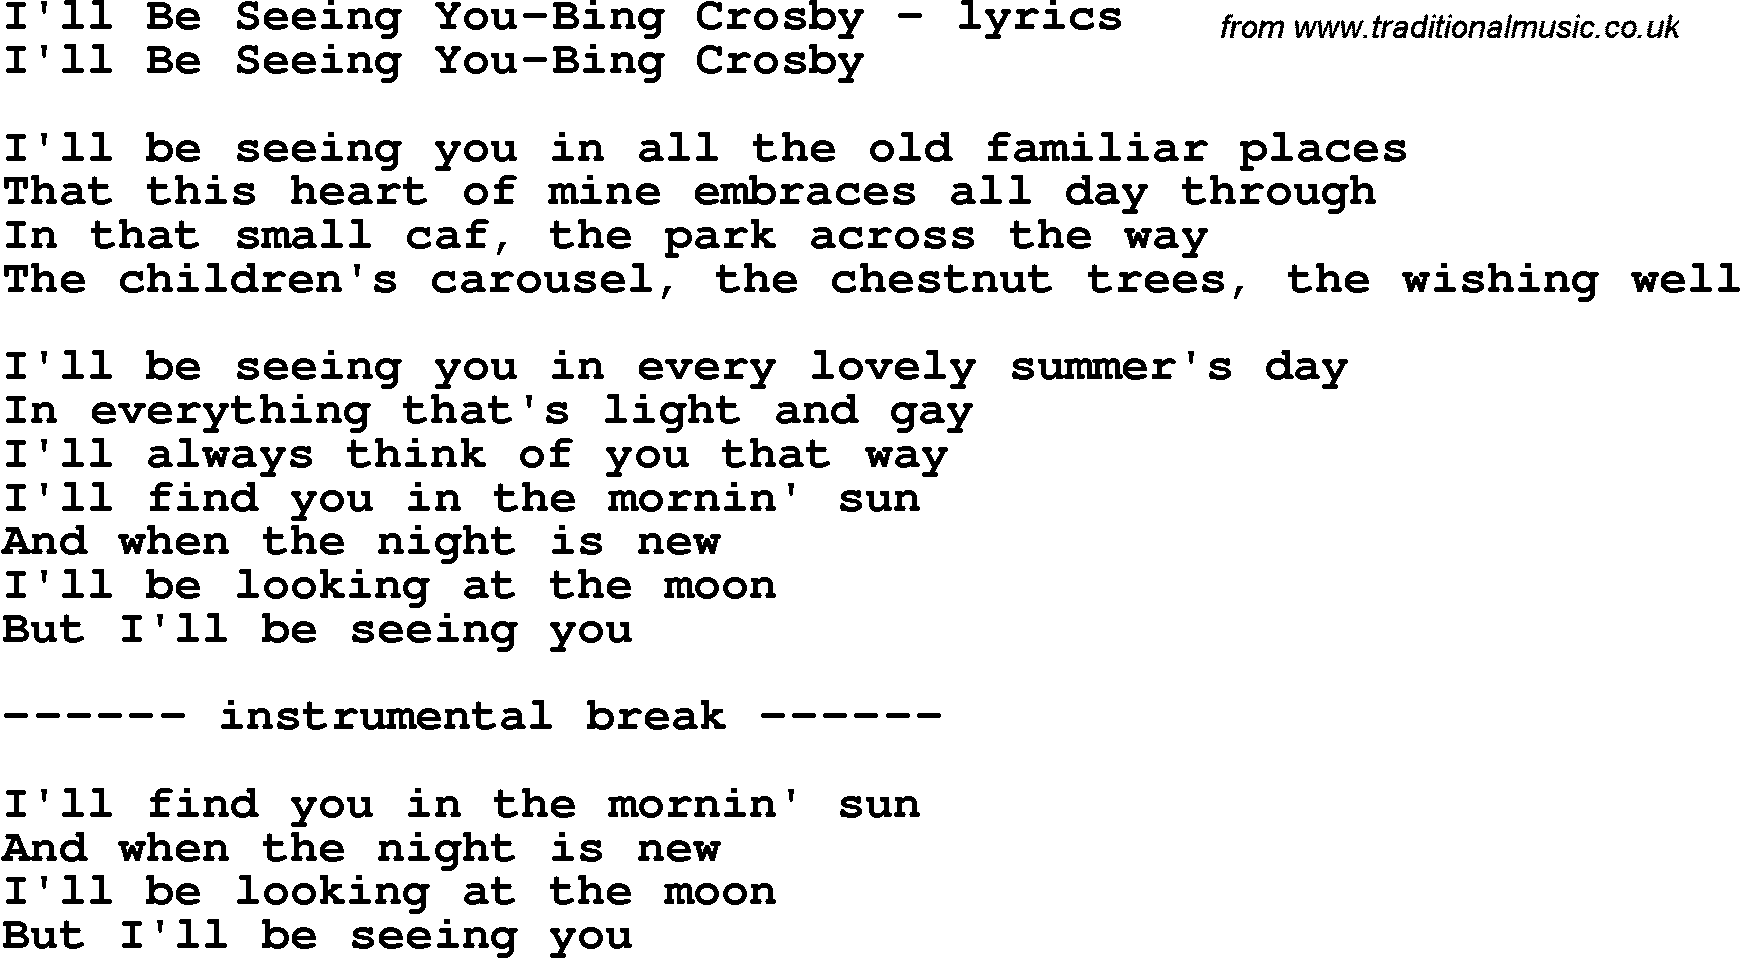 Love Song Lyrics for: I'll Be Seeing You-Bing Crosby